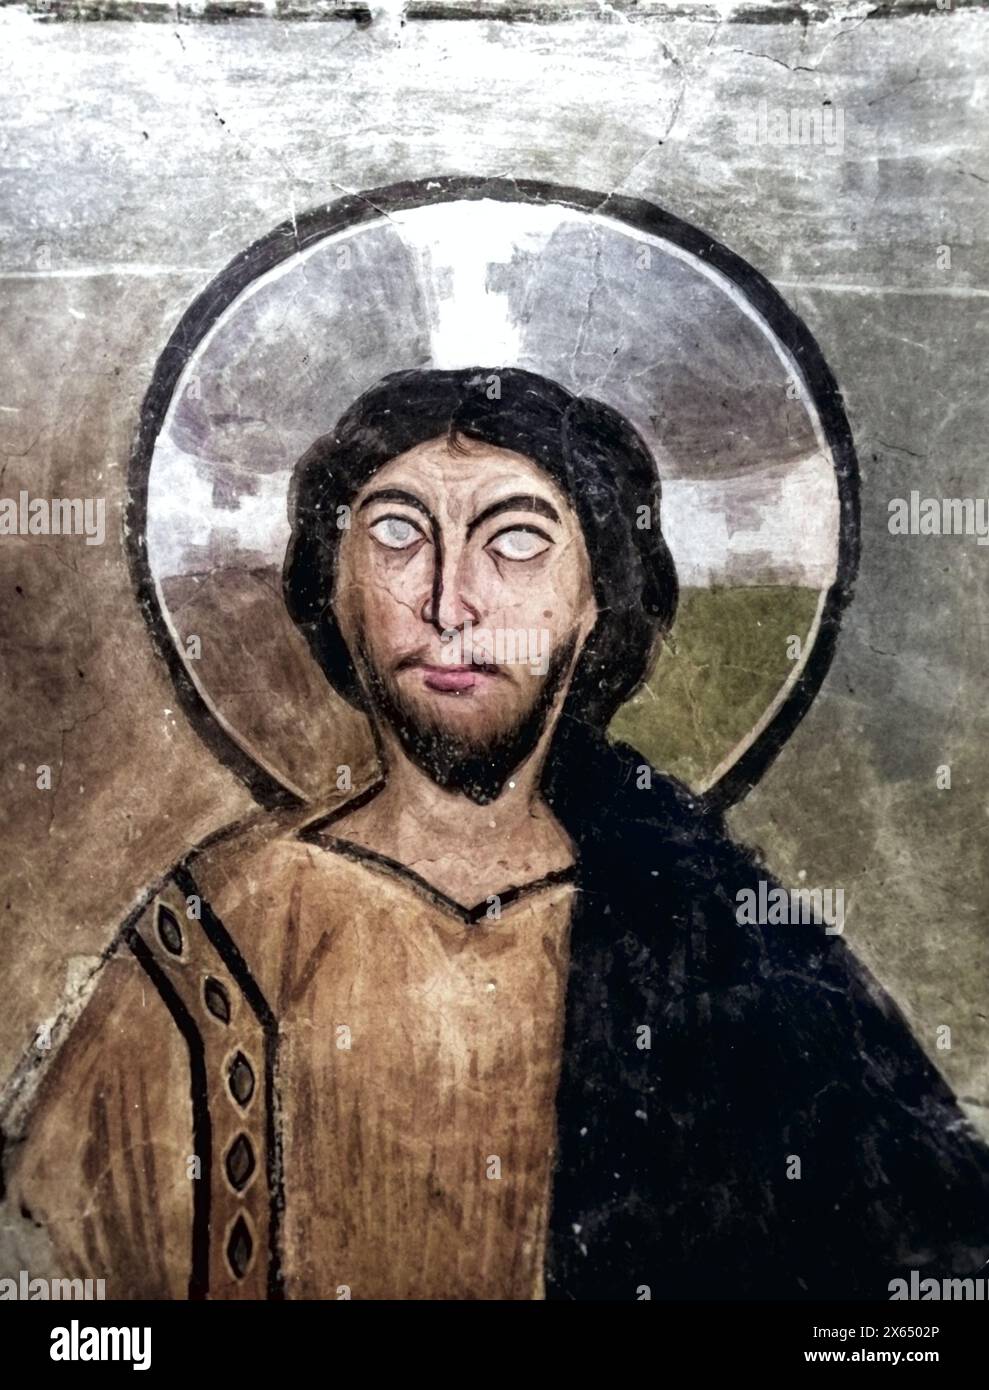 Jesus Christus,probably 4 BC - 30 / 31 AD, Jewish itinerant preacher and founder of a religion, portrait, ARTIST'S COPYRIGHT HAS NOT TO BE CLEARED Stock Photo